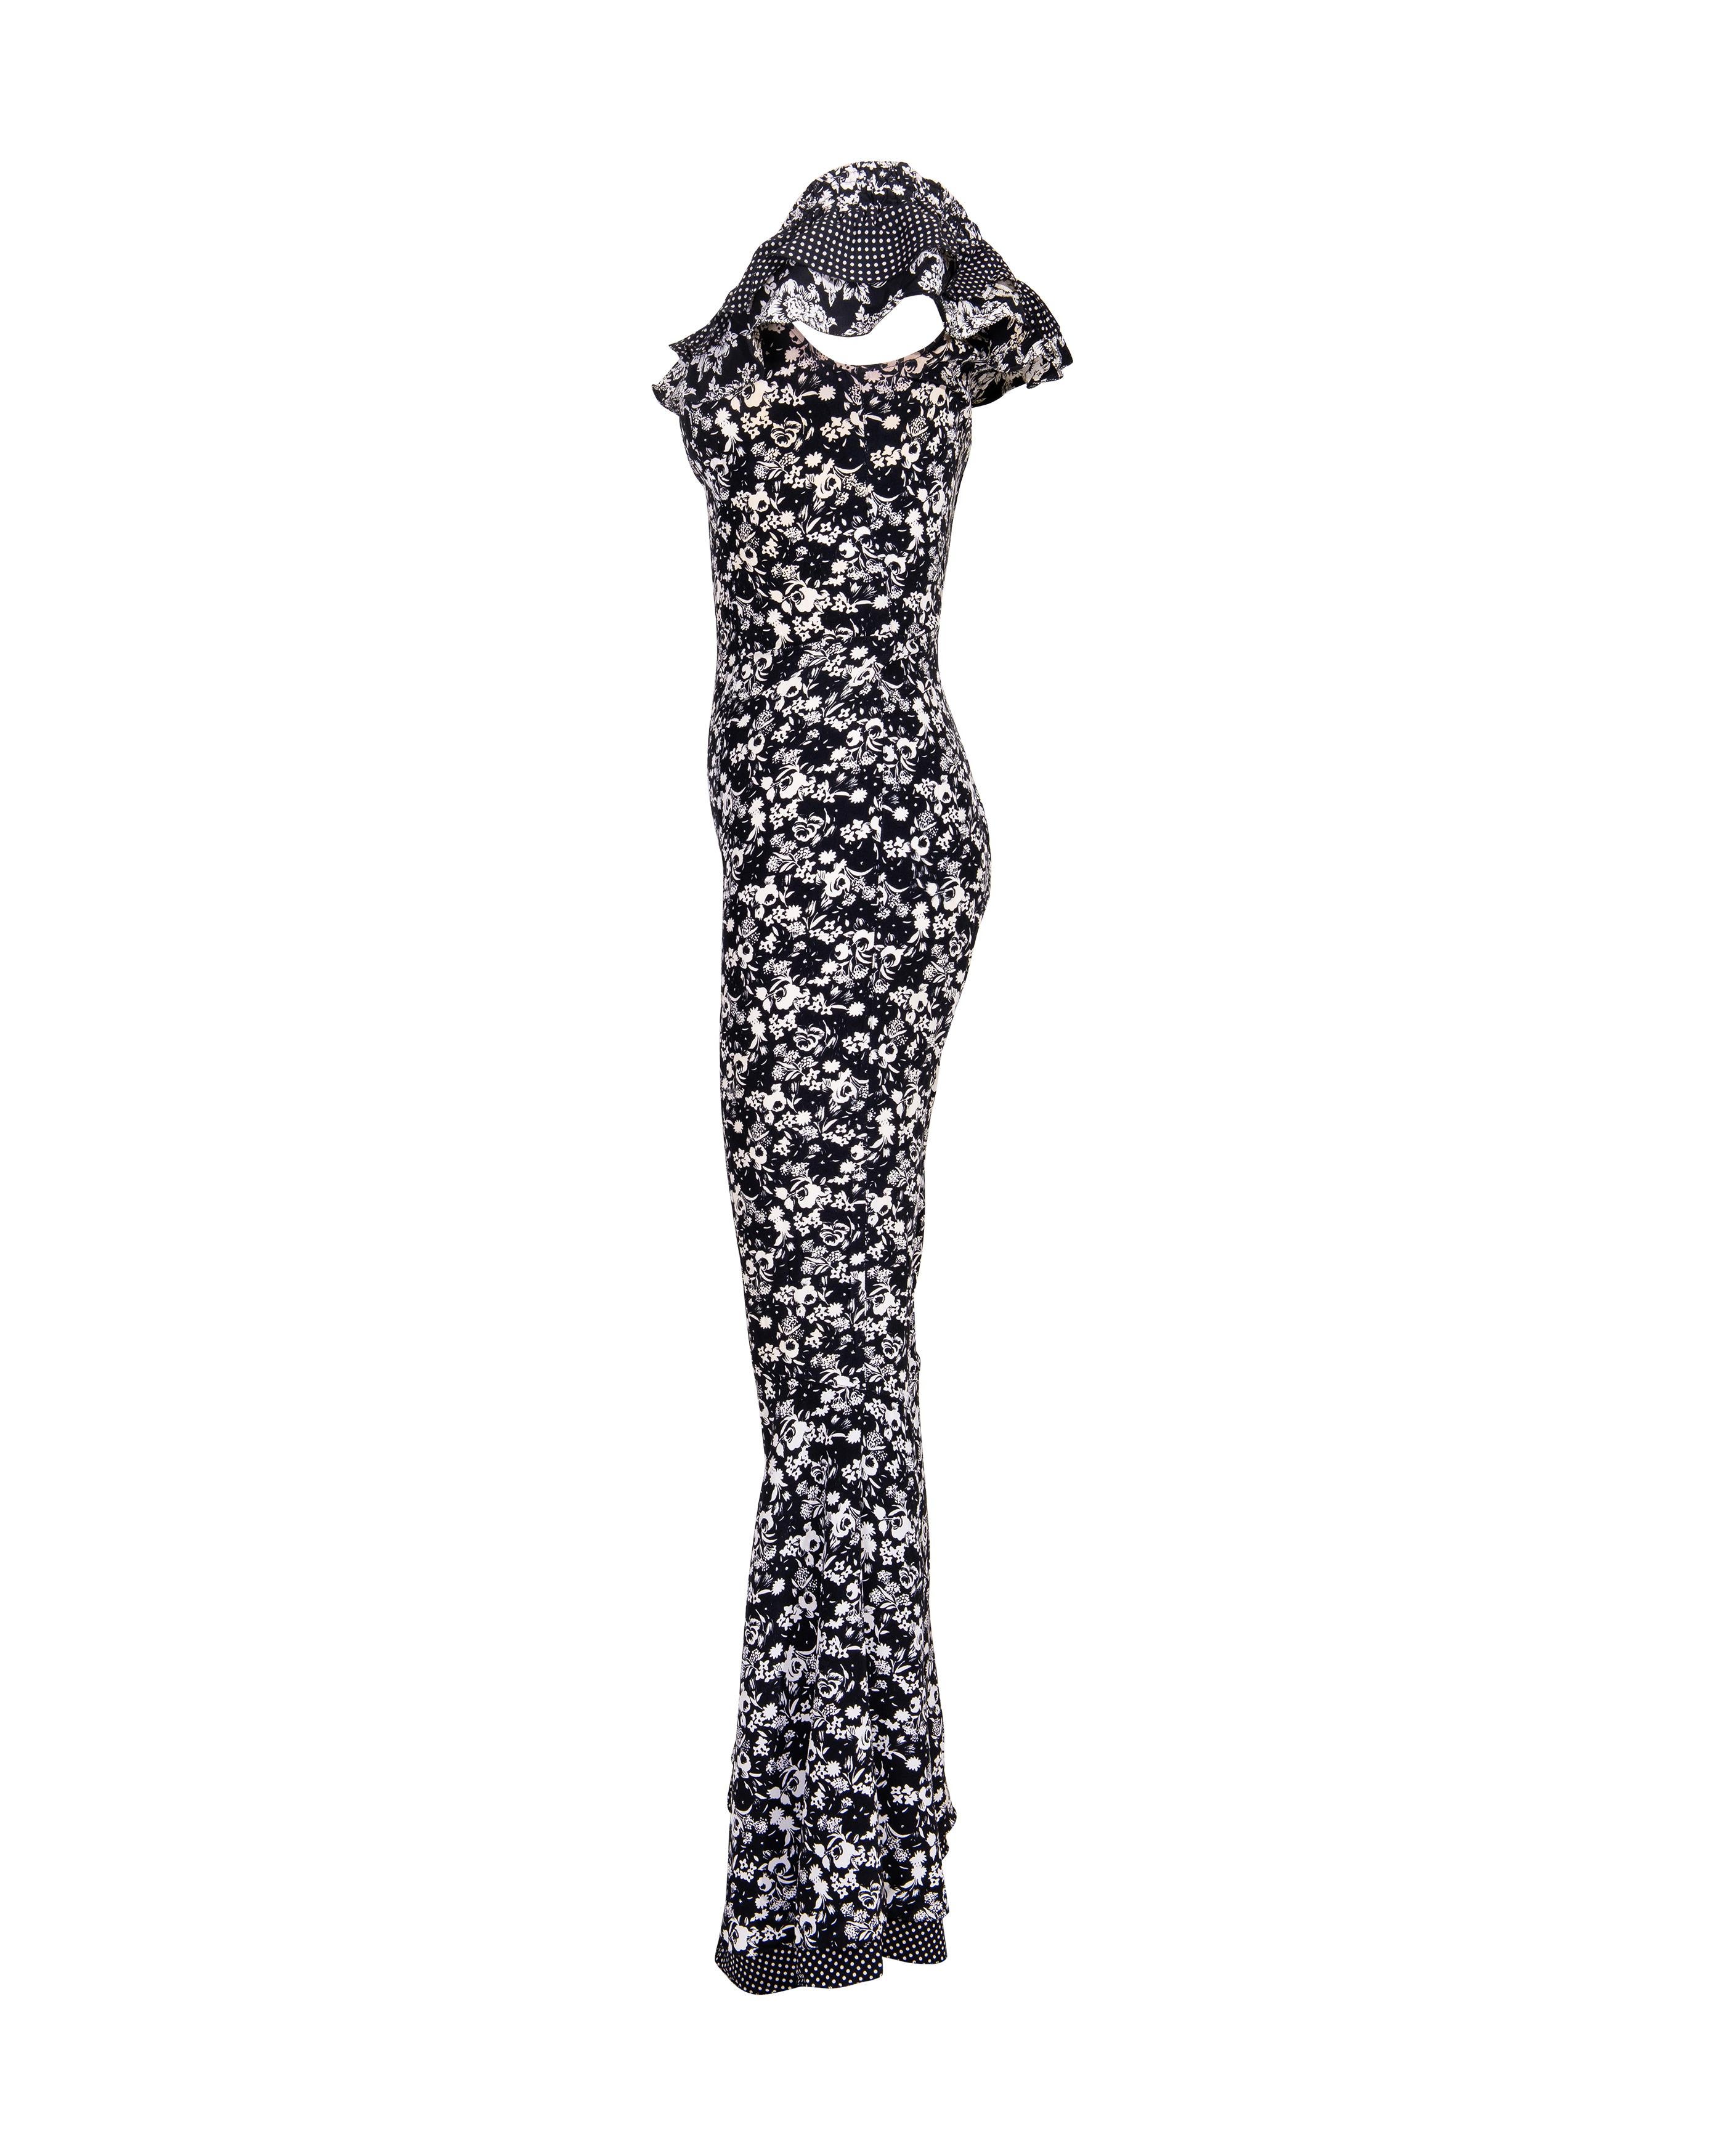 Women's S/S 1993 Gianni Versace Floral and Polka Dot Pattern Bell-Bottom Jumpsuit For Sale